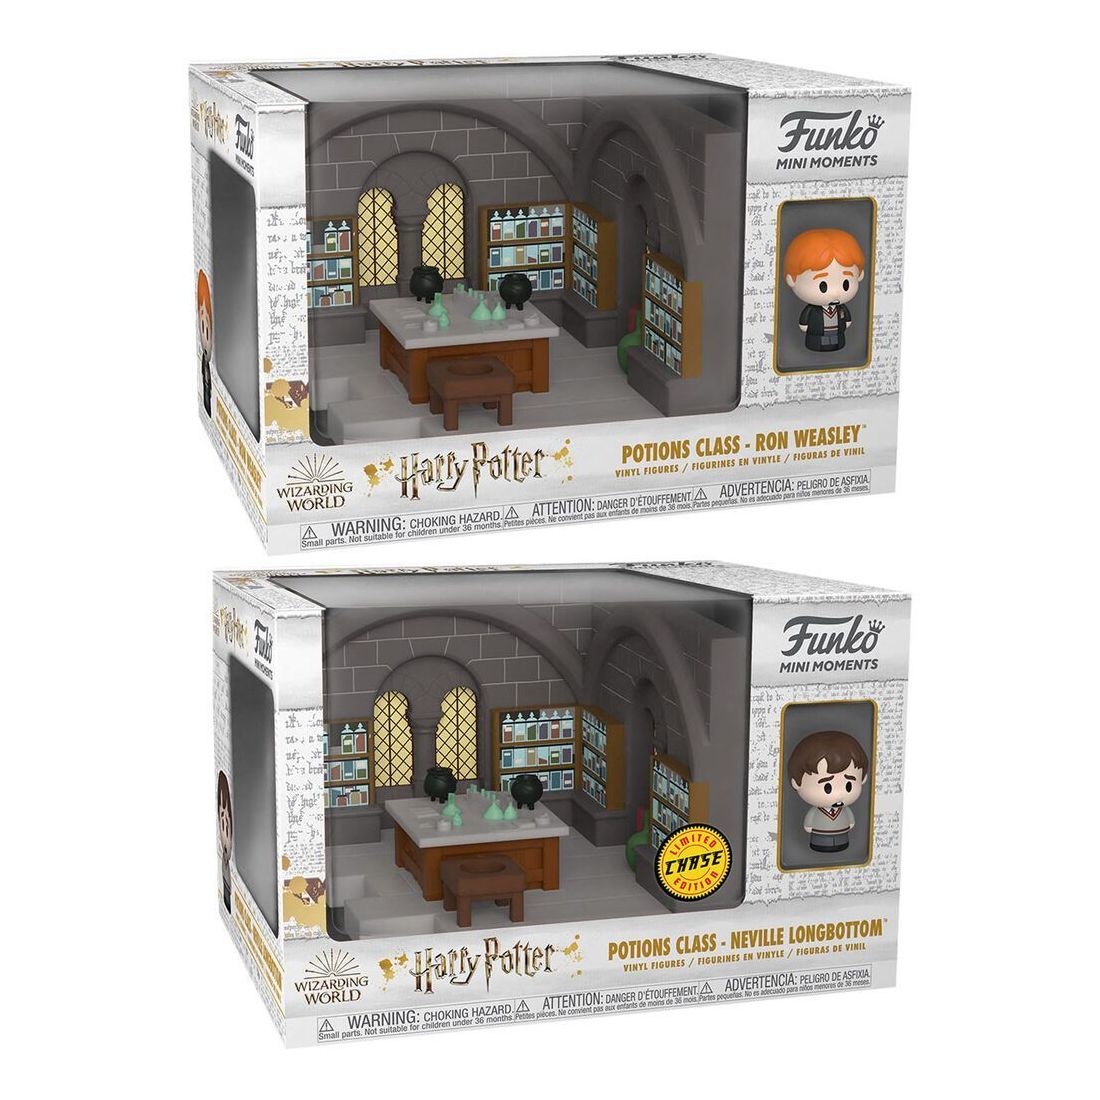 Funko Pop! Mini Moments Harry Potter Anniversary Potions Class Ron Weasley 2.5 Vinyl Figure (With Chase*)